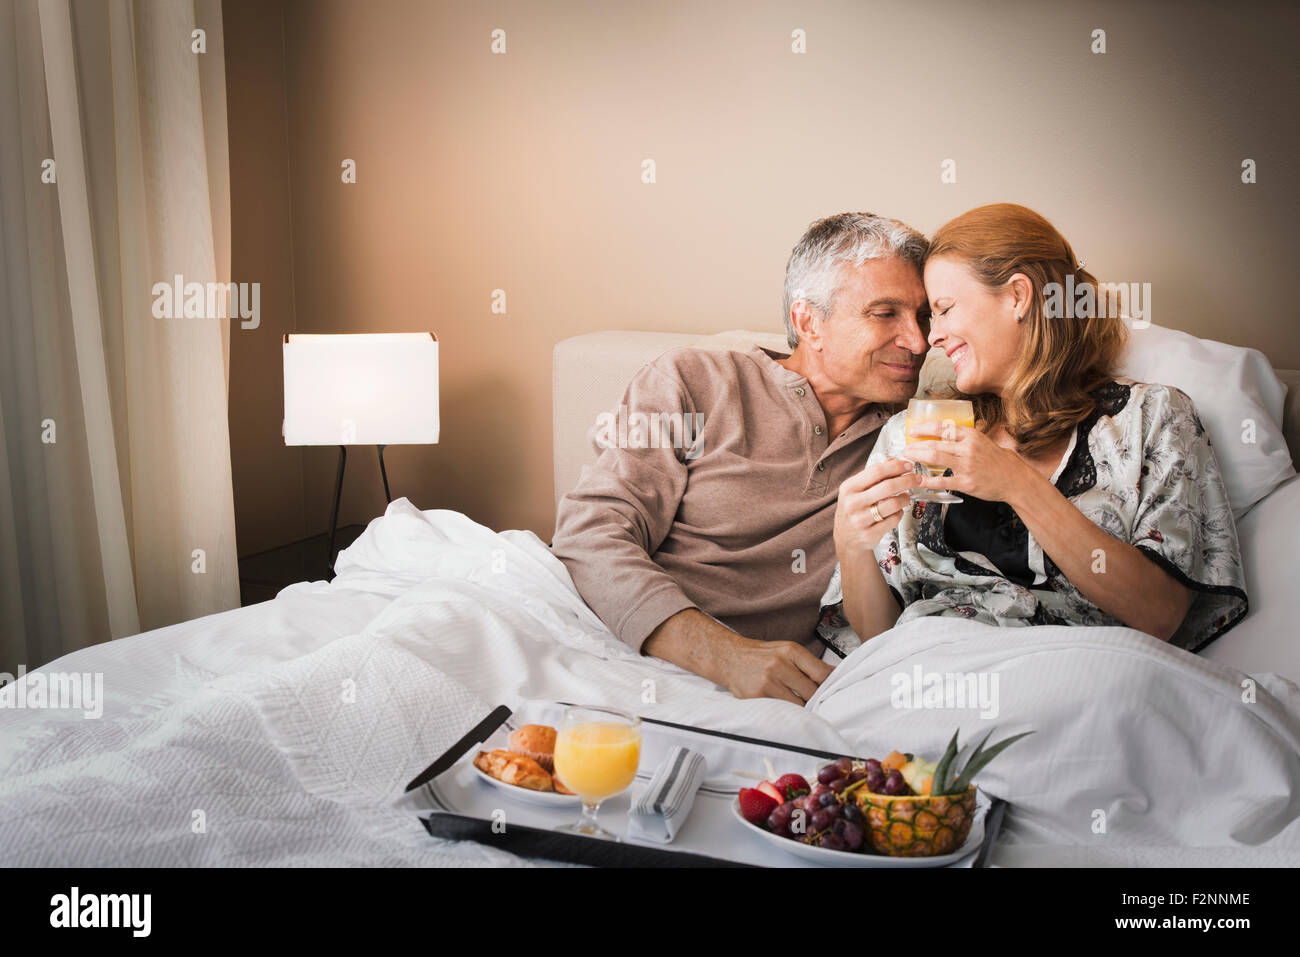 Smiling couple having breakfast in bed Stock Photo